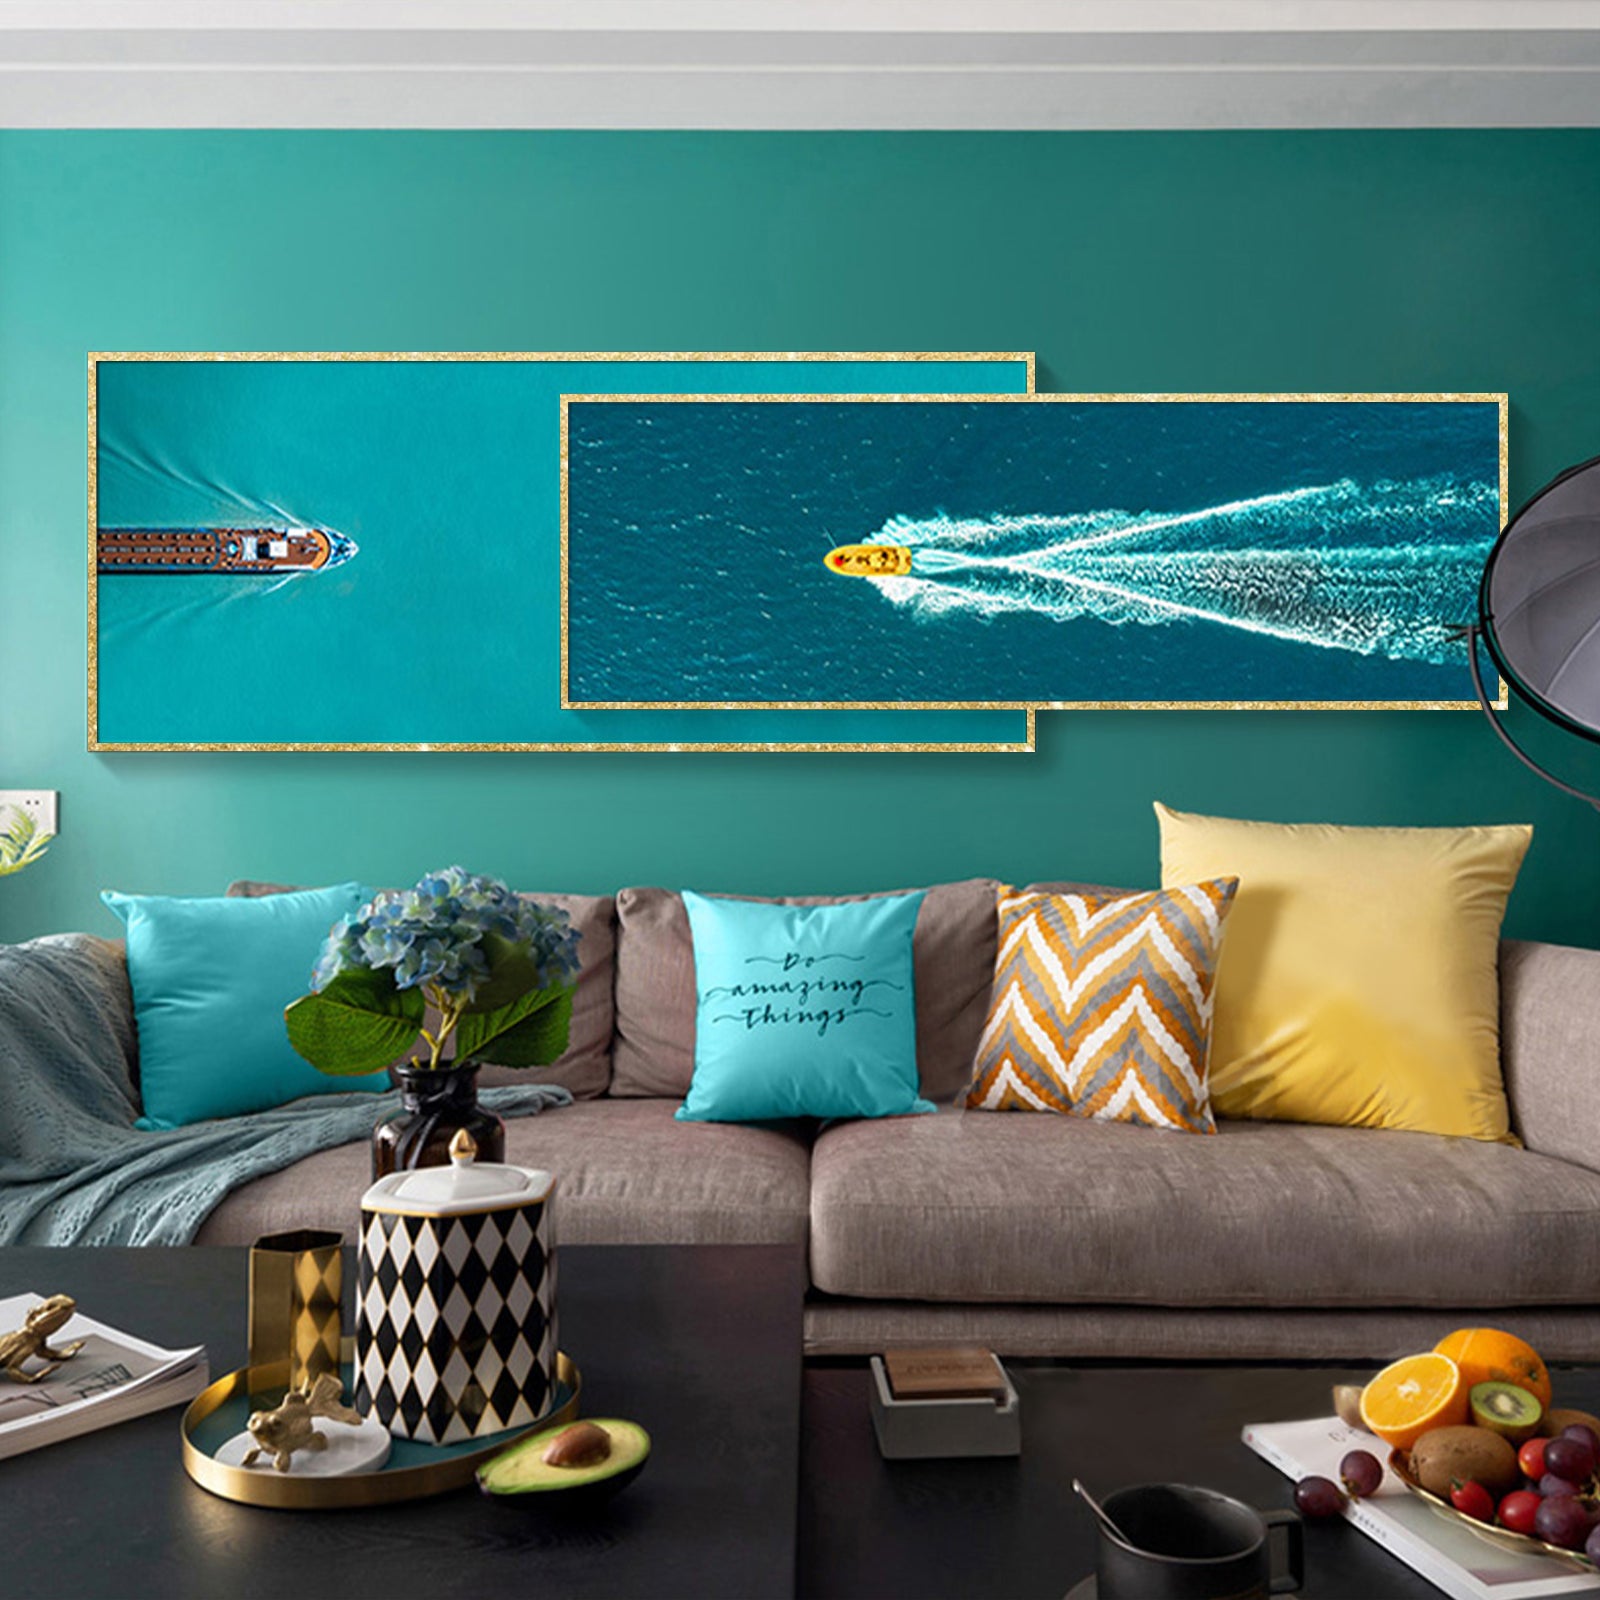 VOFFOV® Boat Sailing On The Sea Double Wall Decor